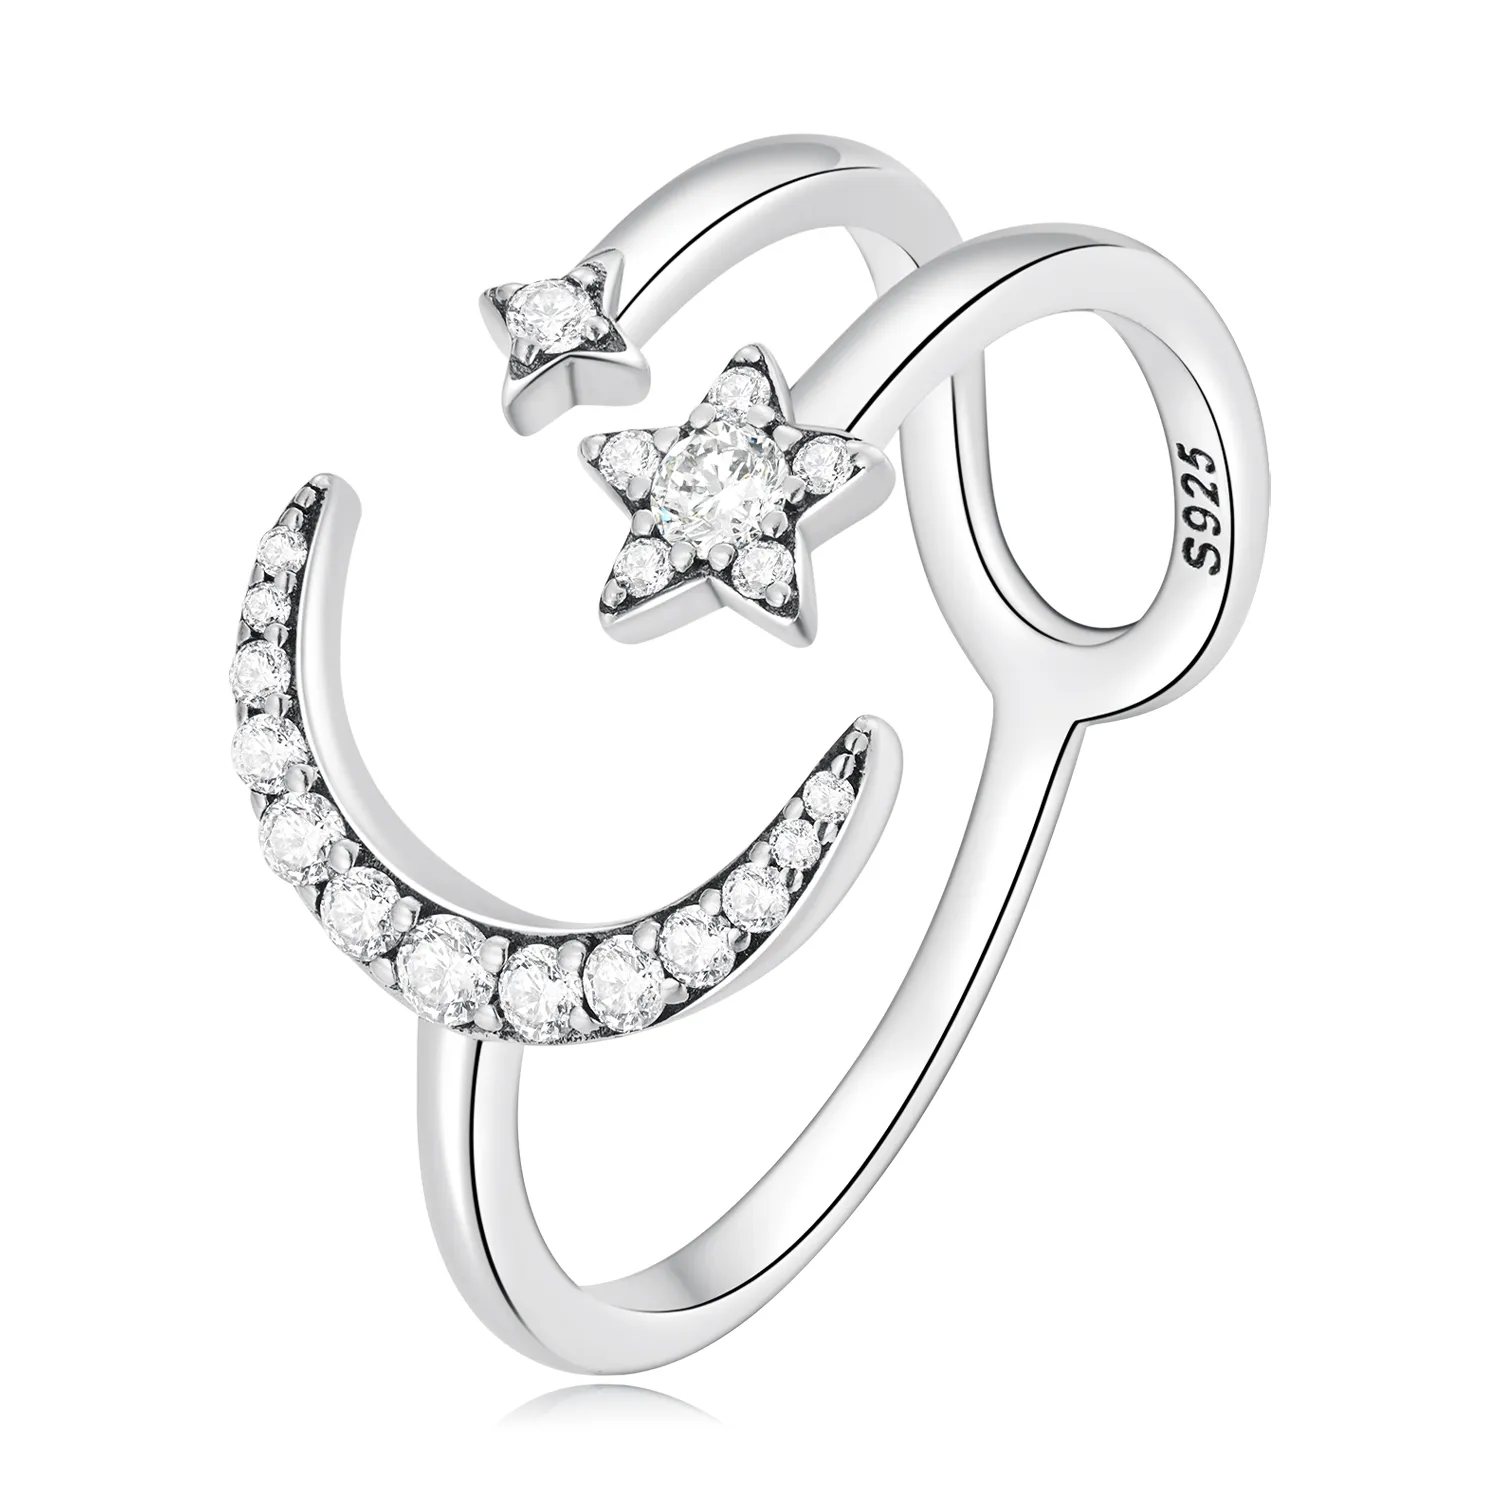 Pandora Style Moon and Stars Open Ring - BSR305